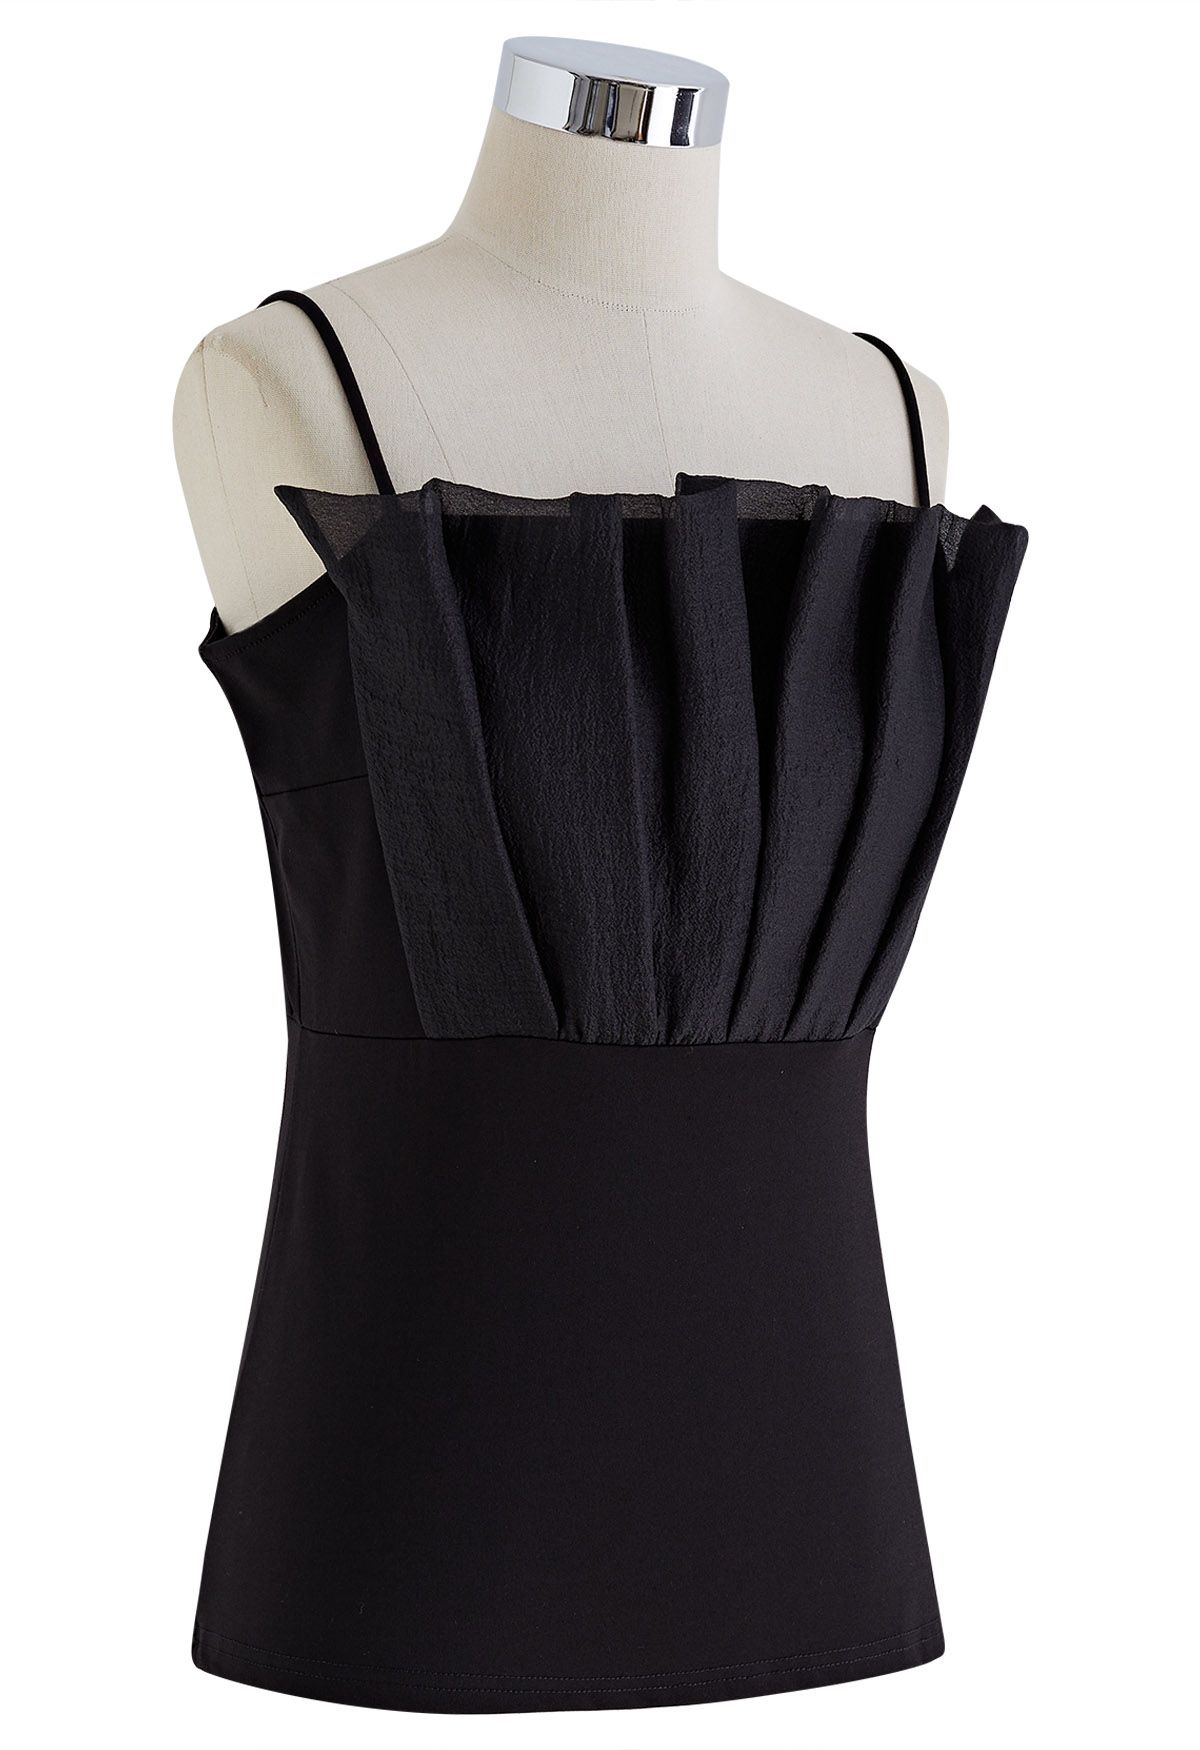 Pleated Front Cami Top in Black